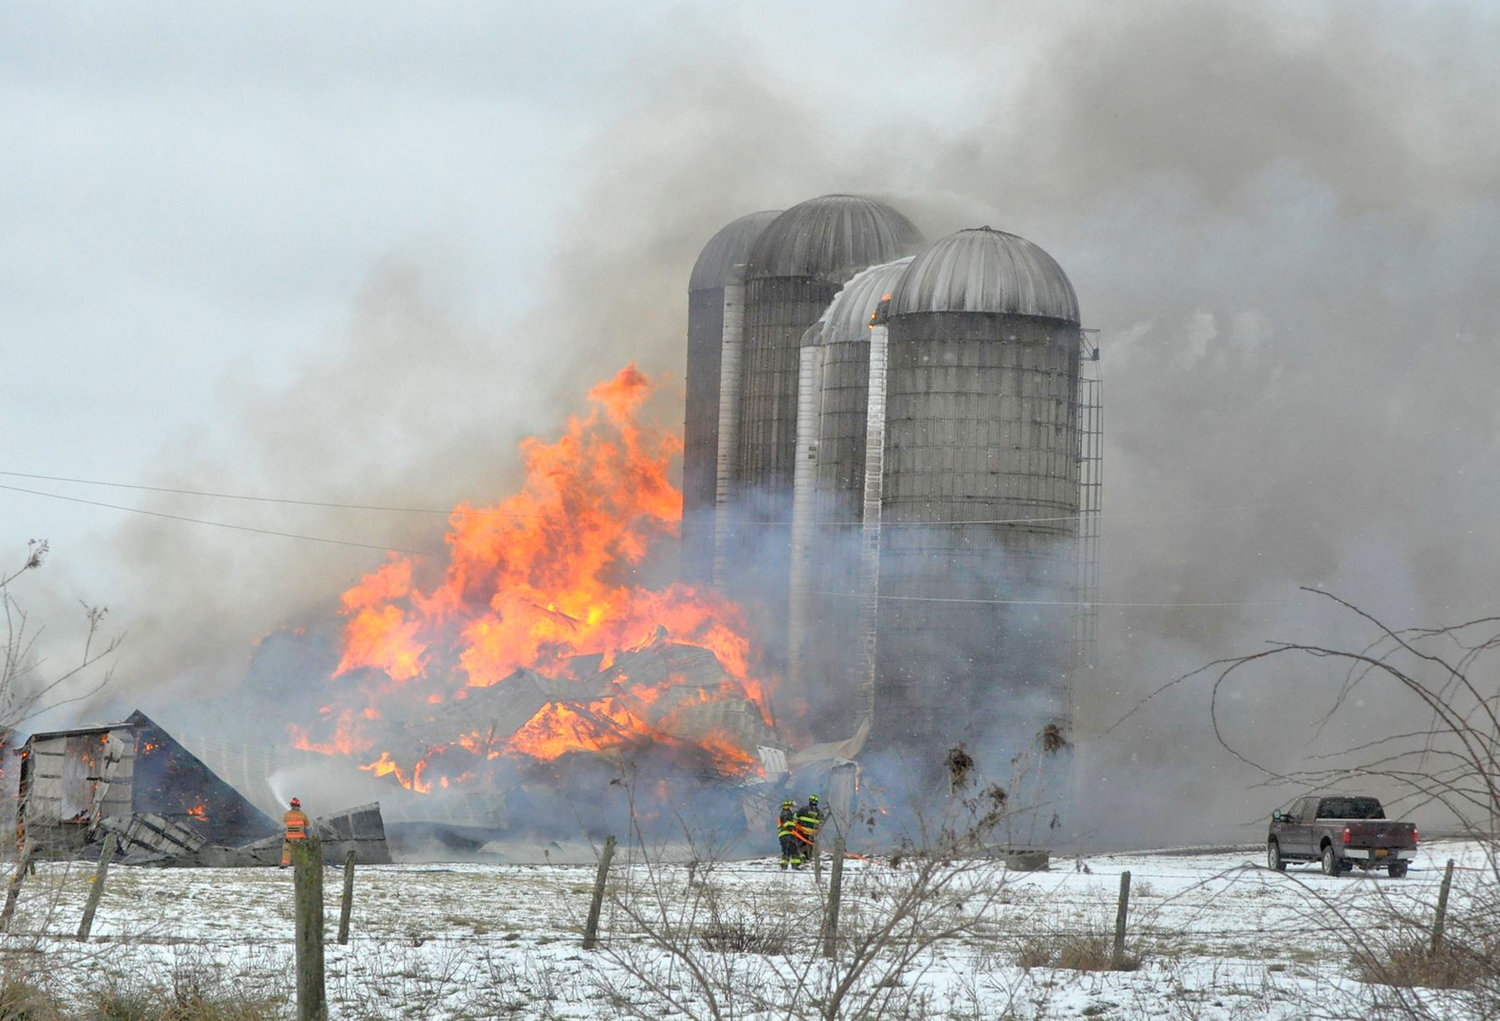 FULLY INVOLVED — Bright orange flames leap into the sky during a large barn fire on Whittaker Road in Trenton on Sunday. Fire officials said the 60-foot by 200-foot barn was fully involved, and had partially collapsed, by the time they arrived on the scene.